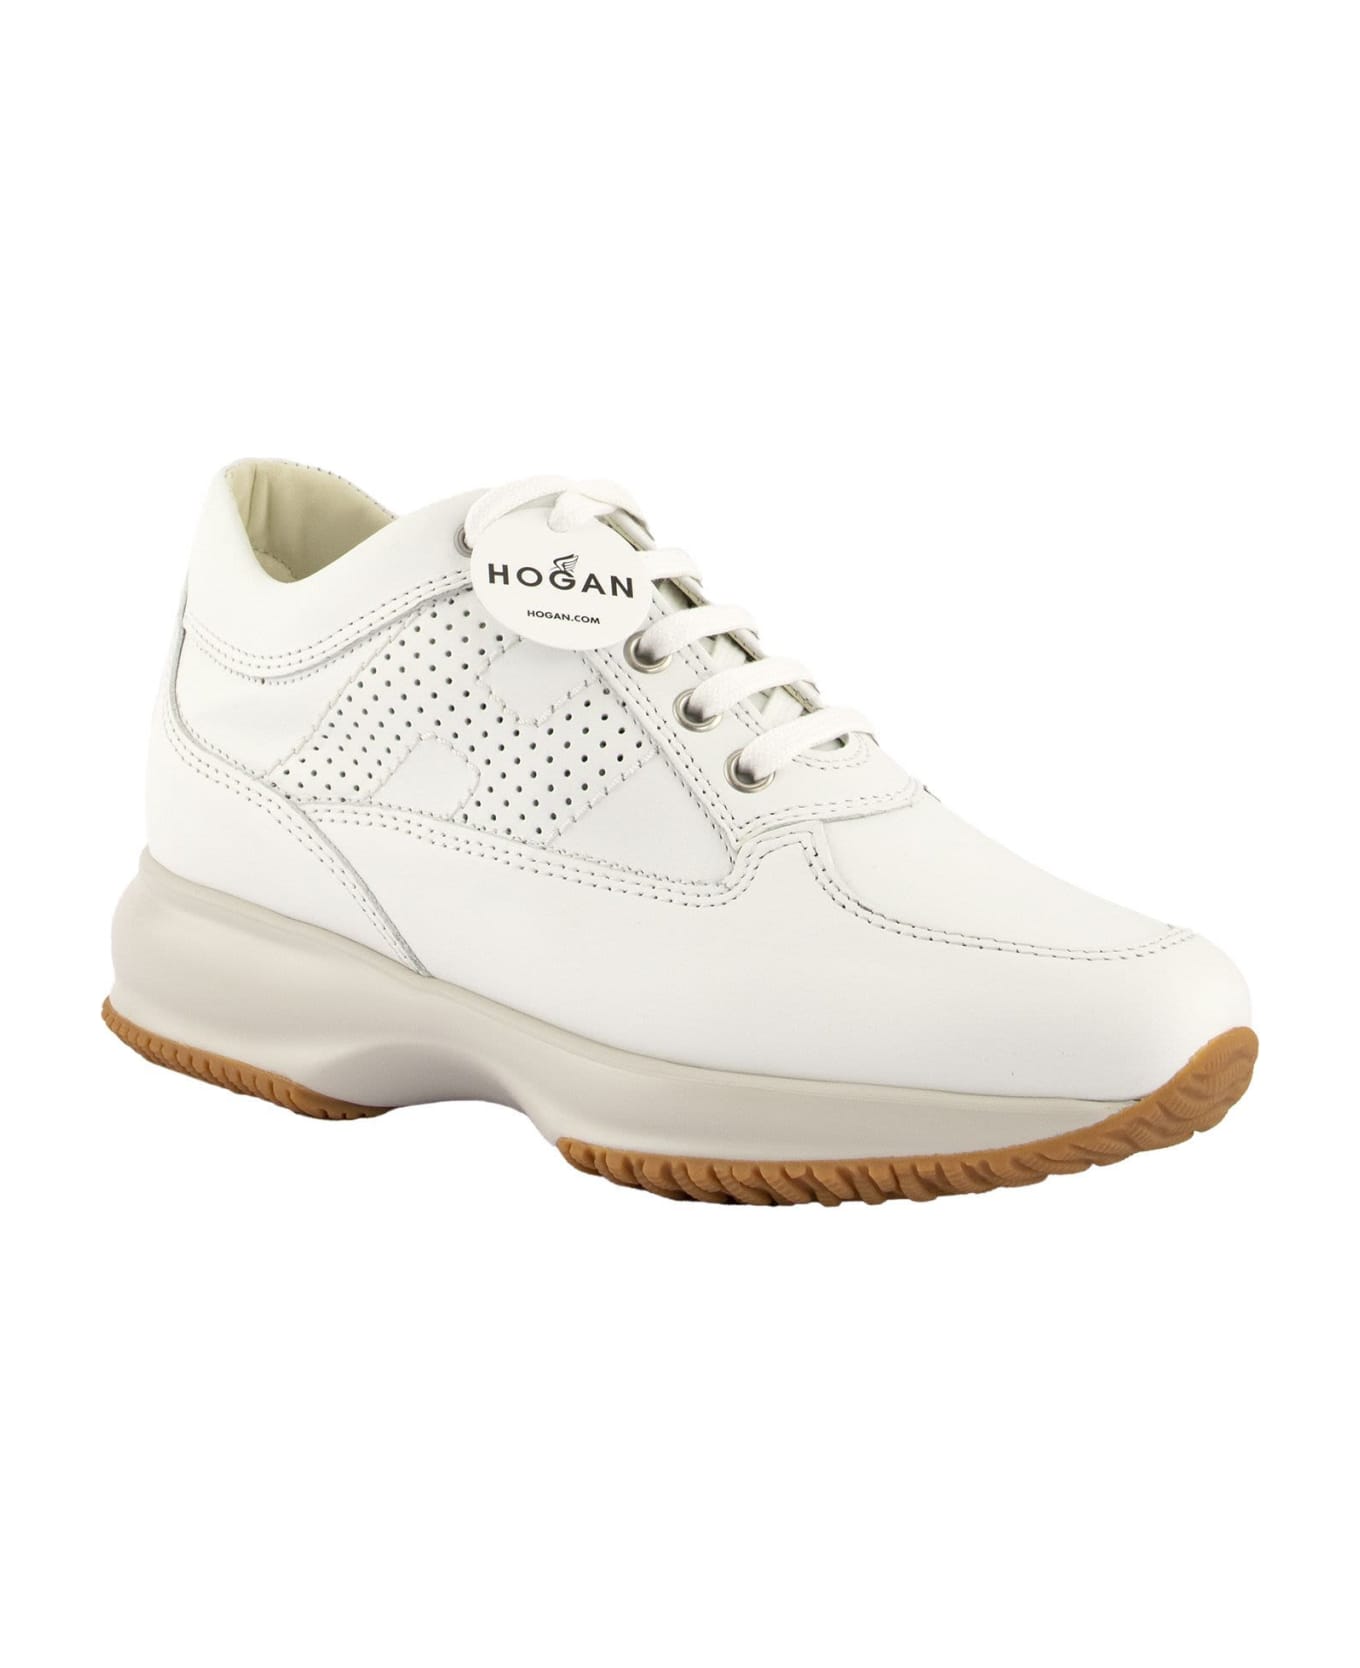 Hogan Interactive Sneakers With Perforated Monogram - White